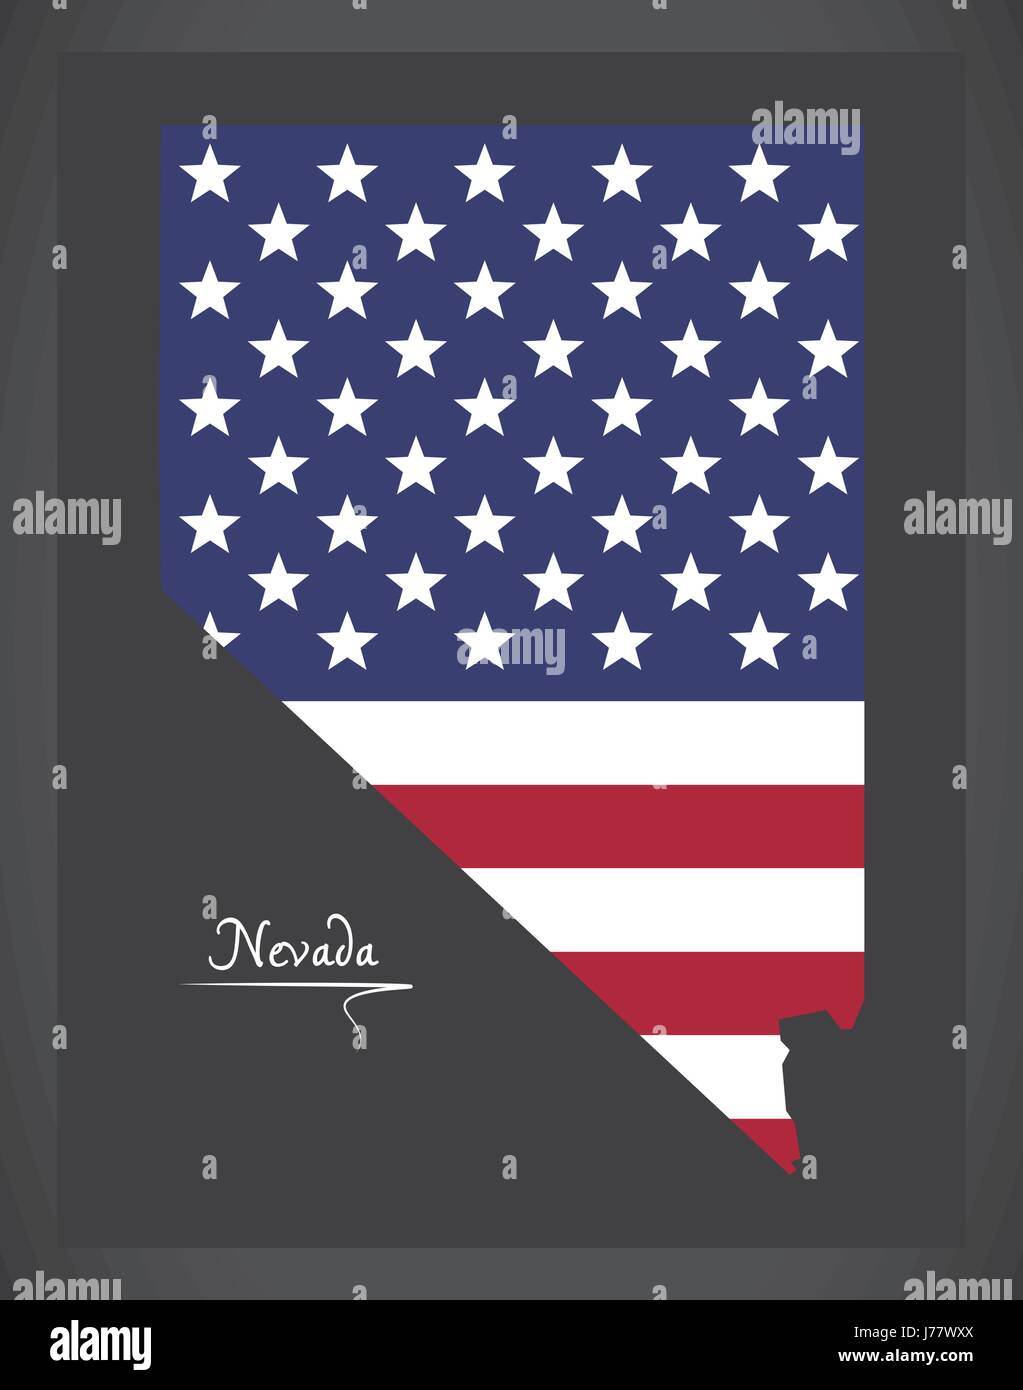 Nevada map with American national flag illustration Stock Vector Image ...